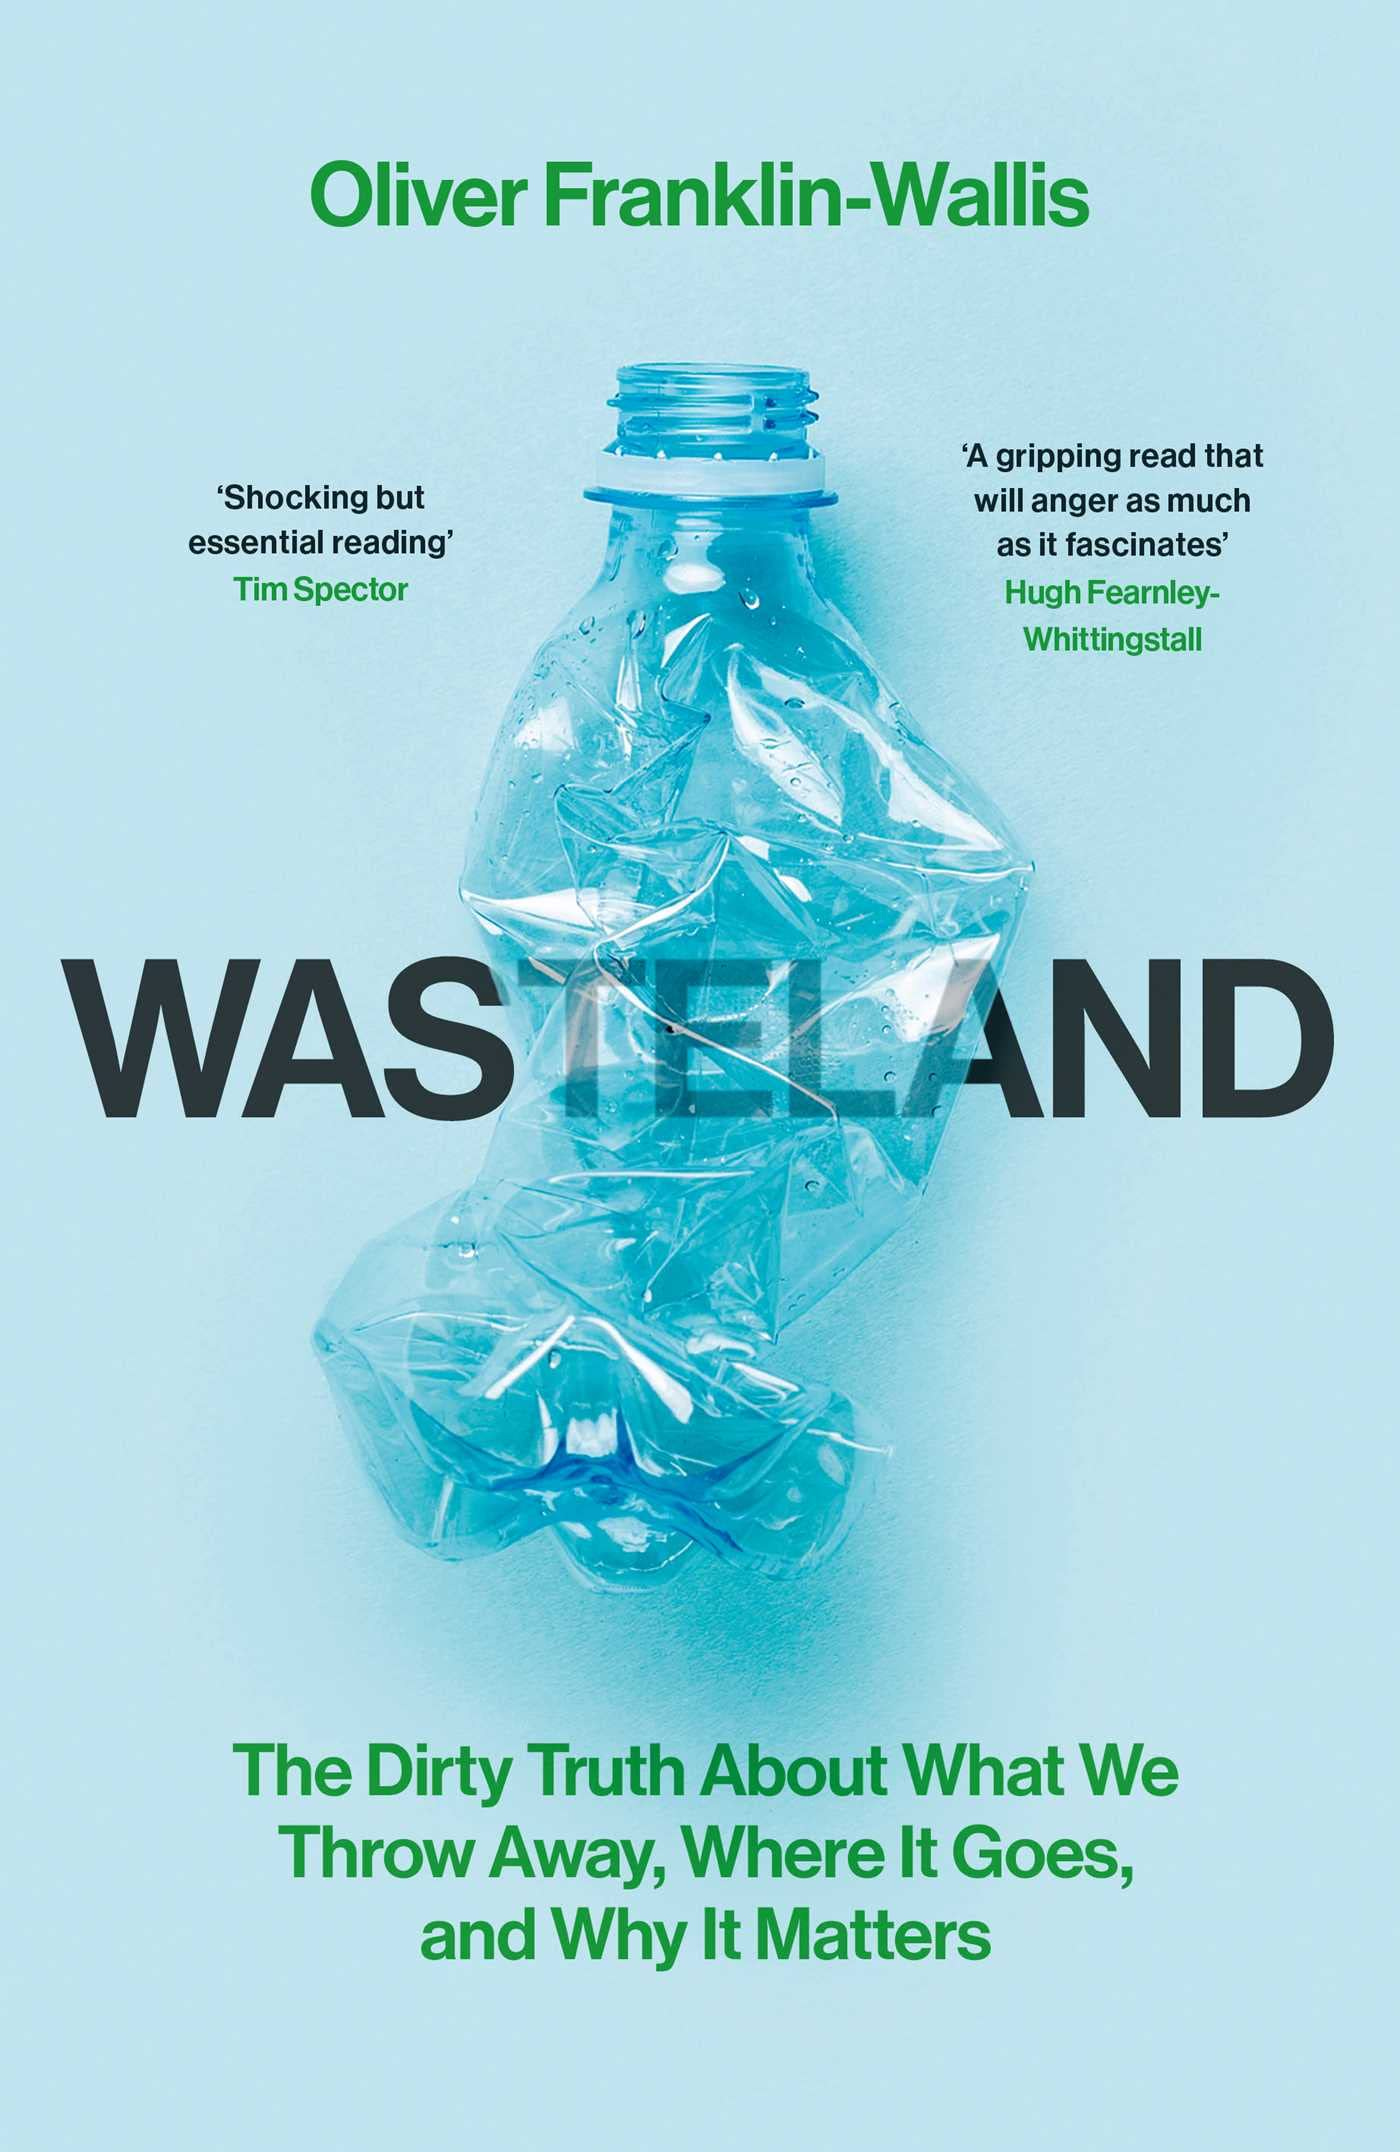 Wasteland: The Dirty Truth About What We Throw Away by Oliver Franklin-Wallis